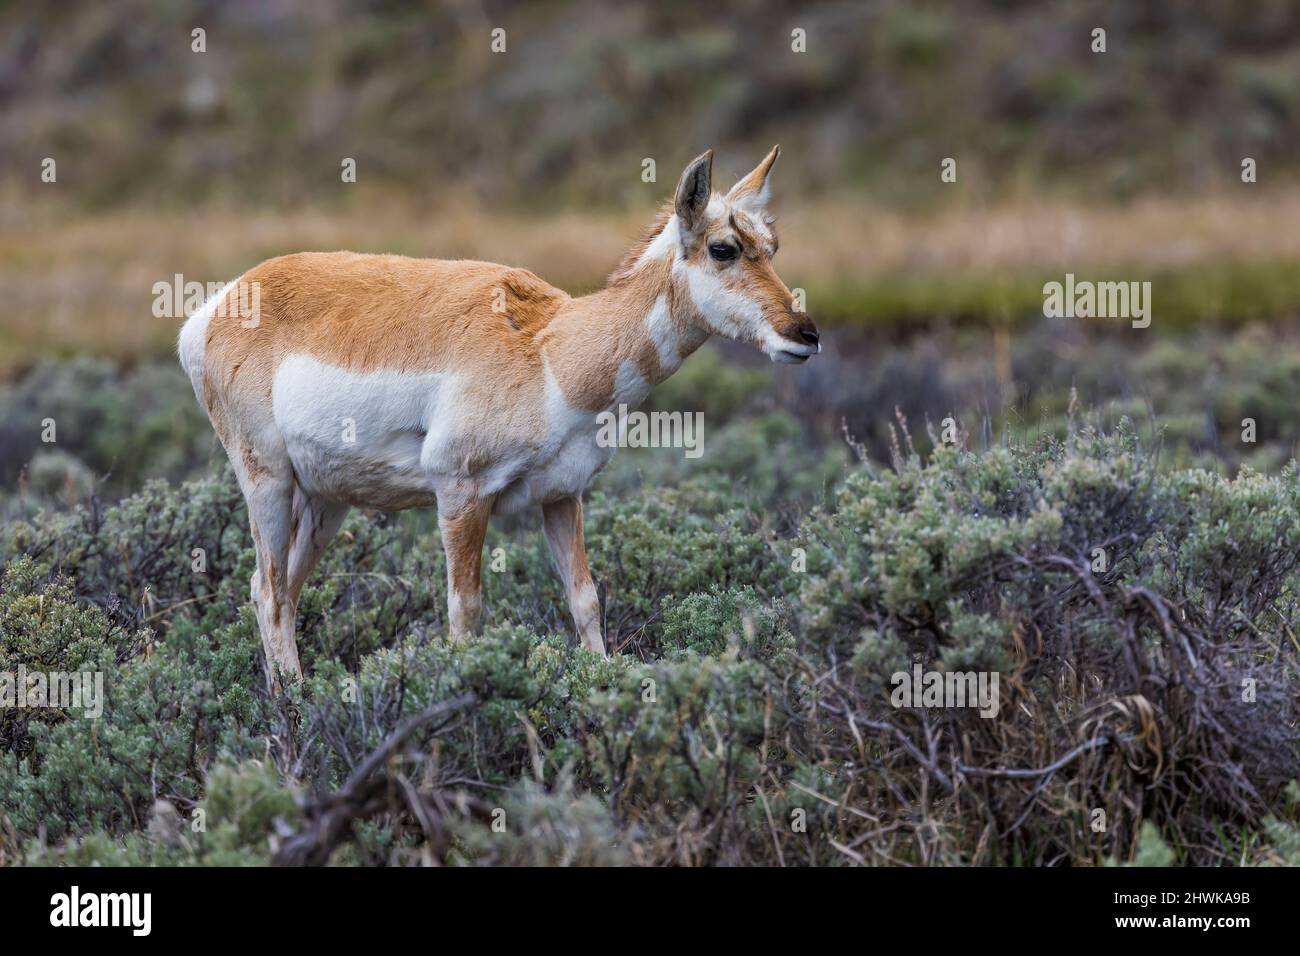 Pronghorn, Antilocapra americana, in the Lamar Valley of Yellowstone National Park, Wyoming, USA Stock Photo